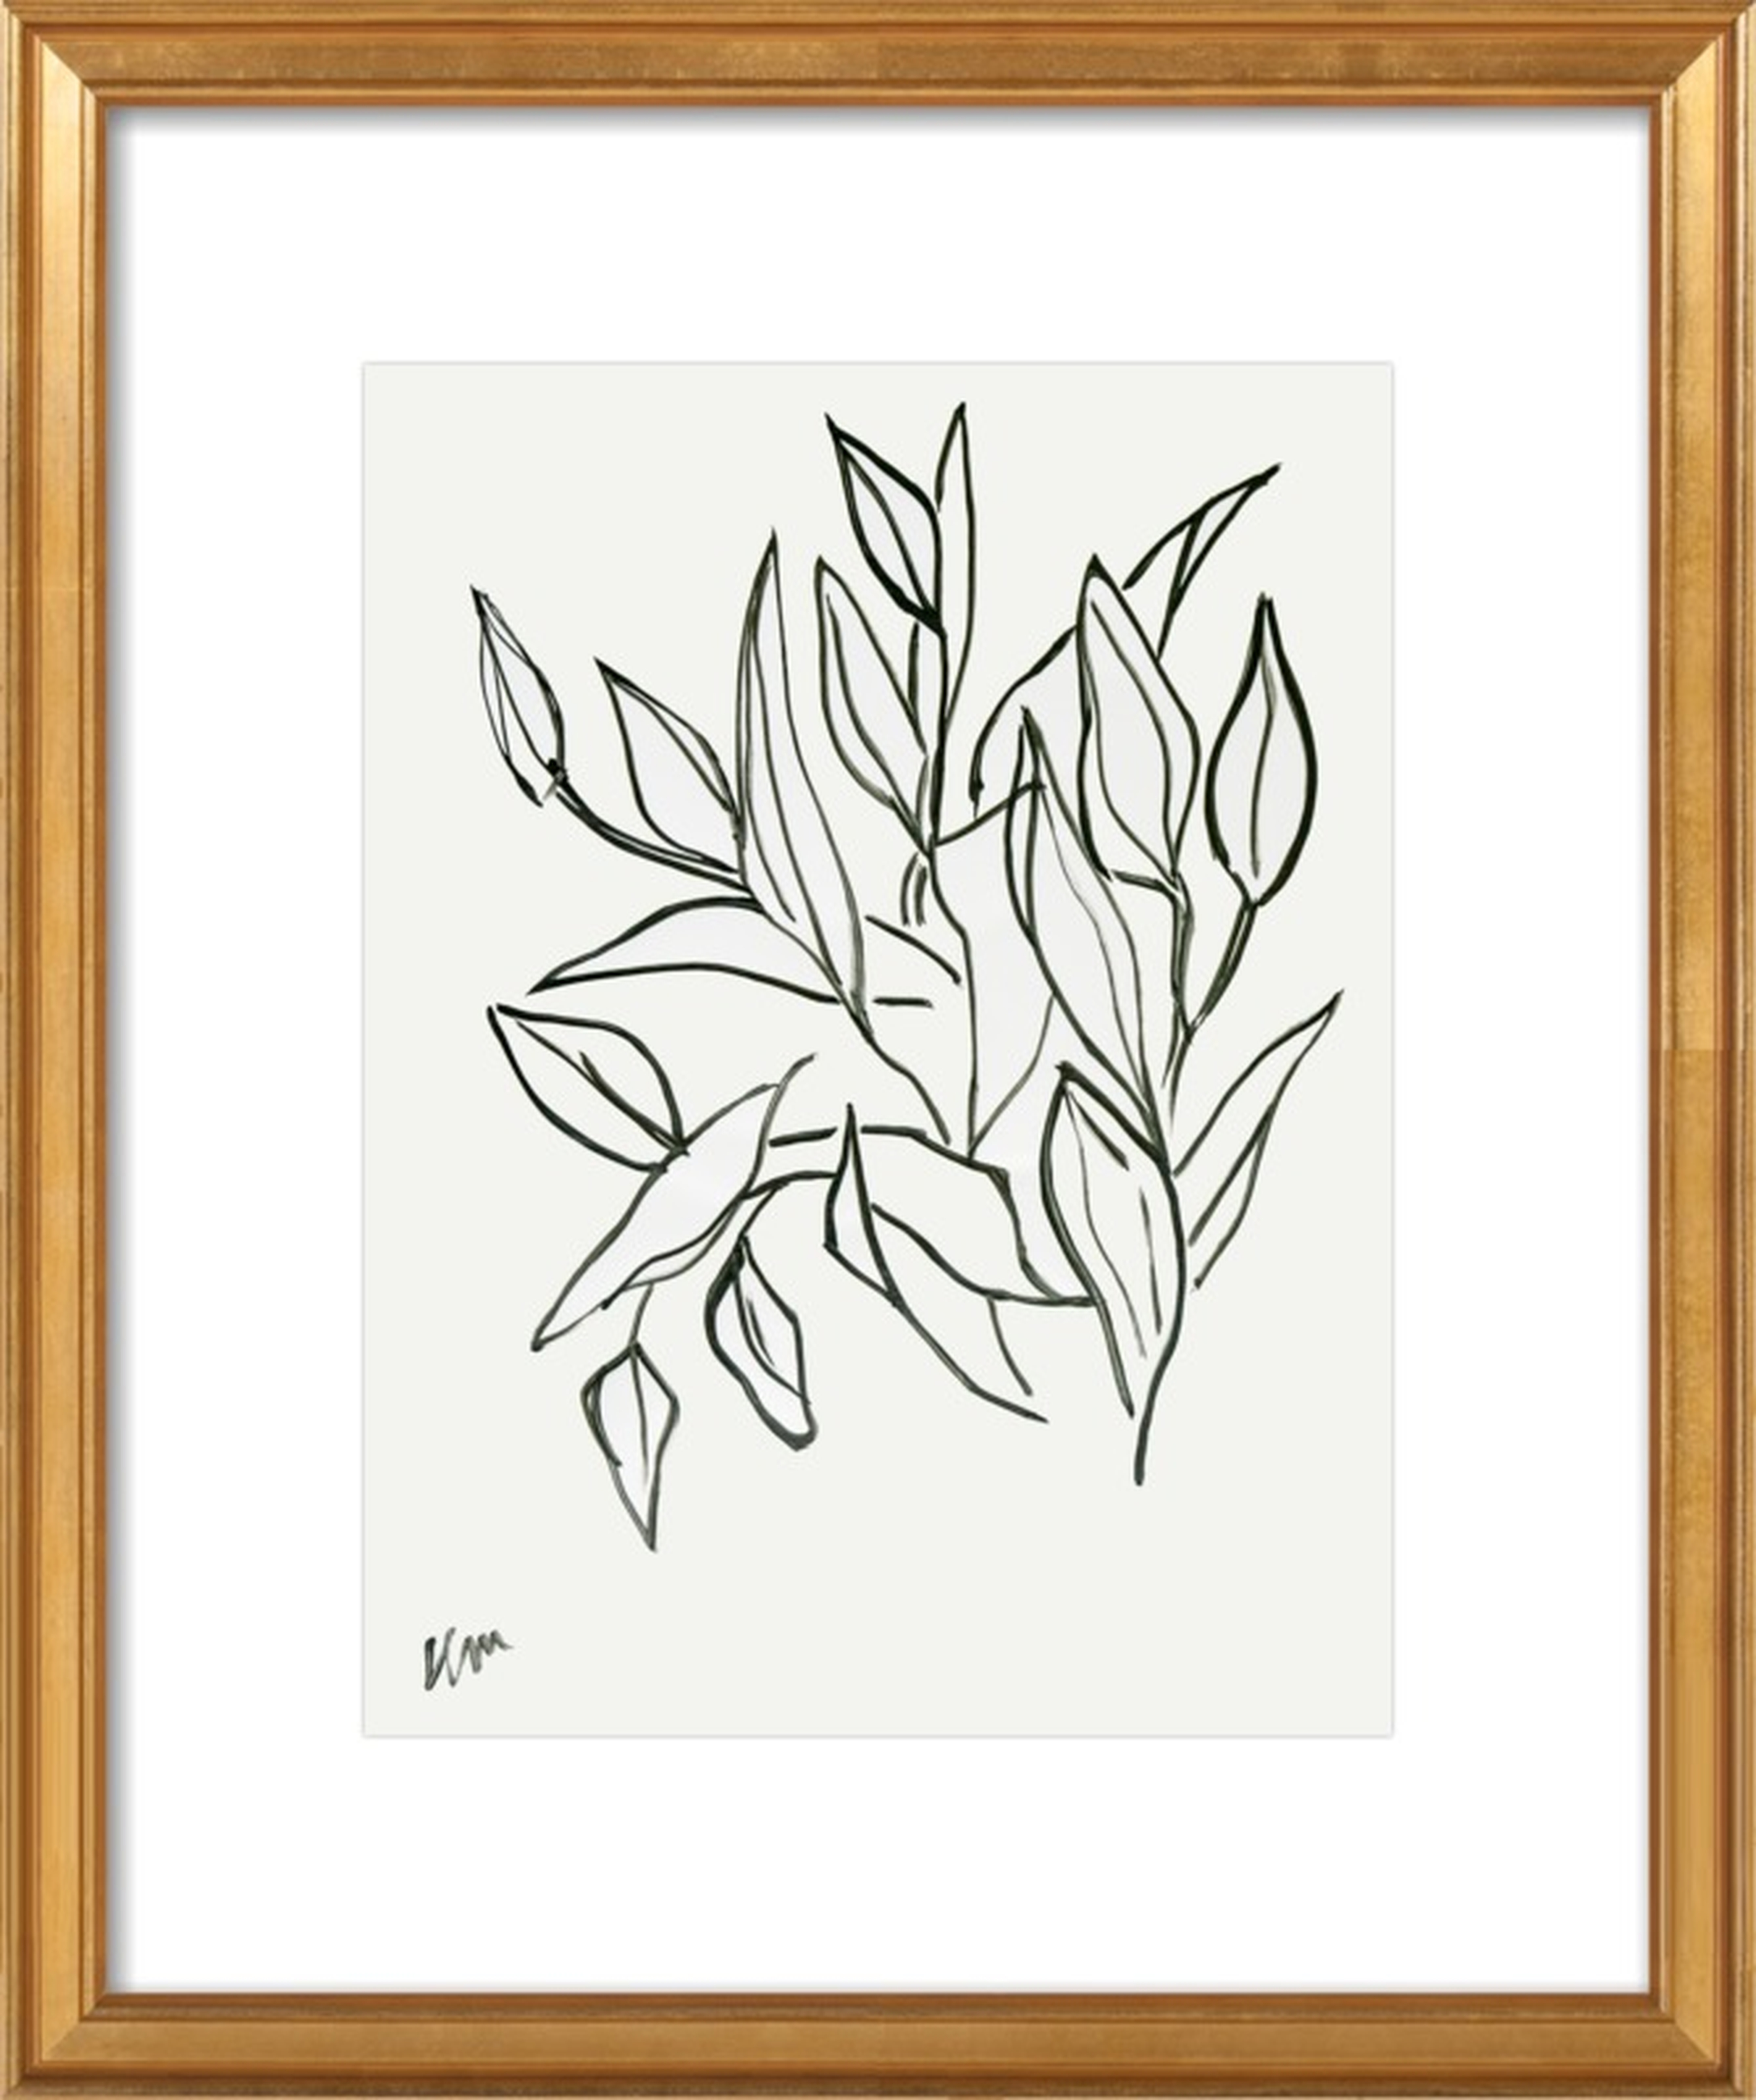 Lilies - 20x24" - Gold Leaf Wood Frame with Matte - Artfully Walls